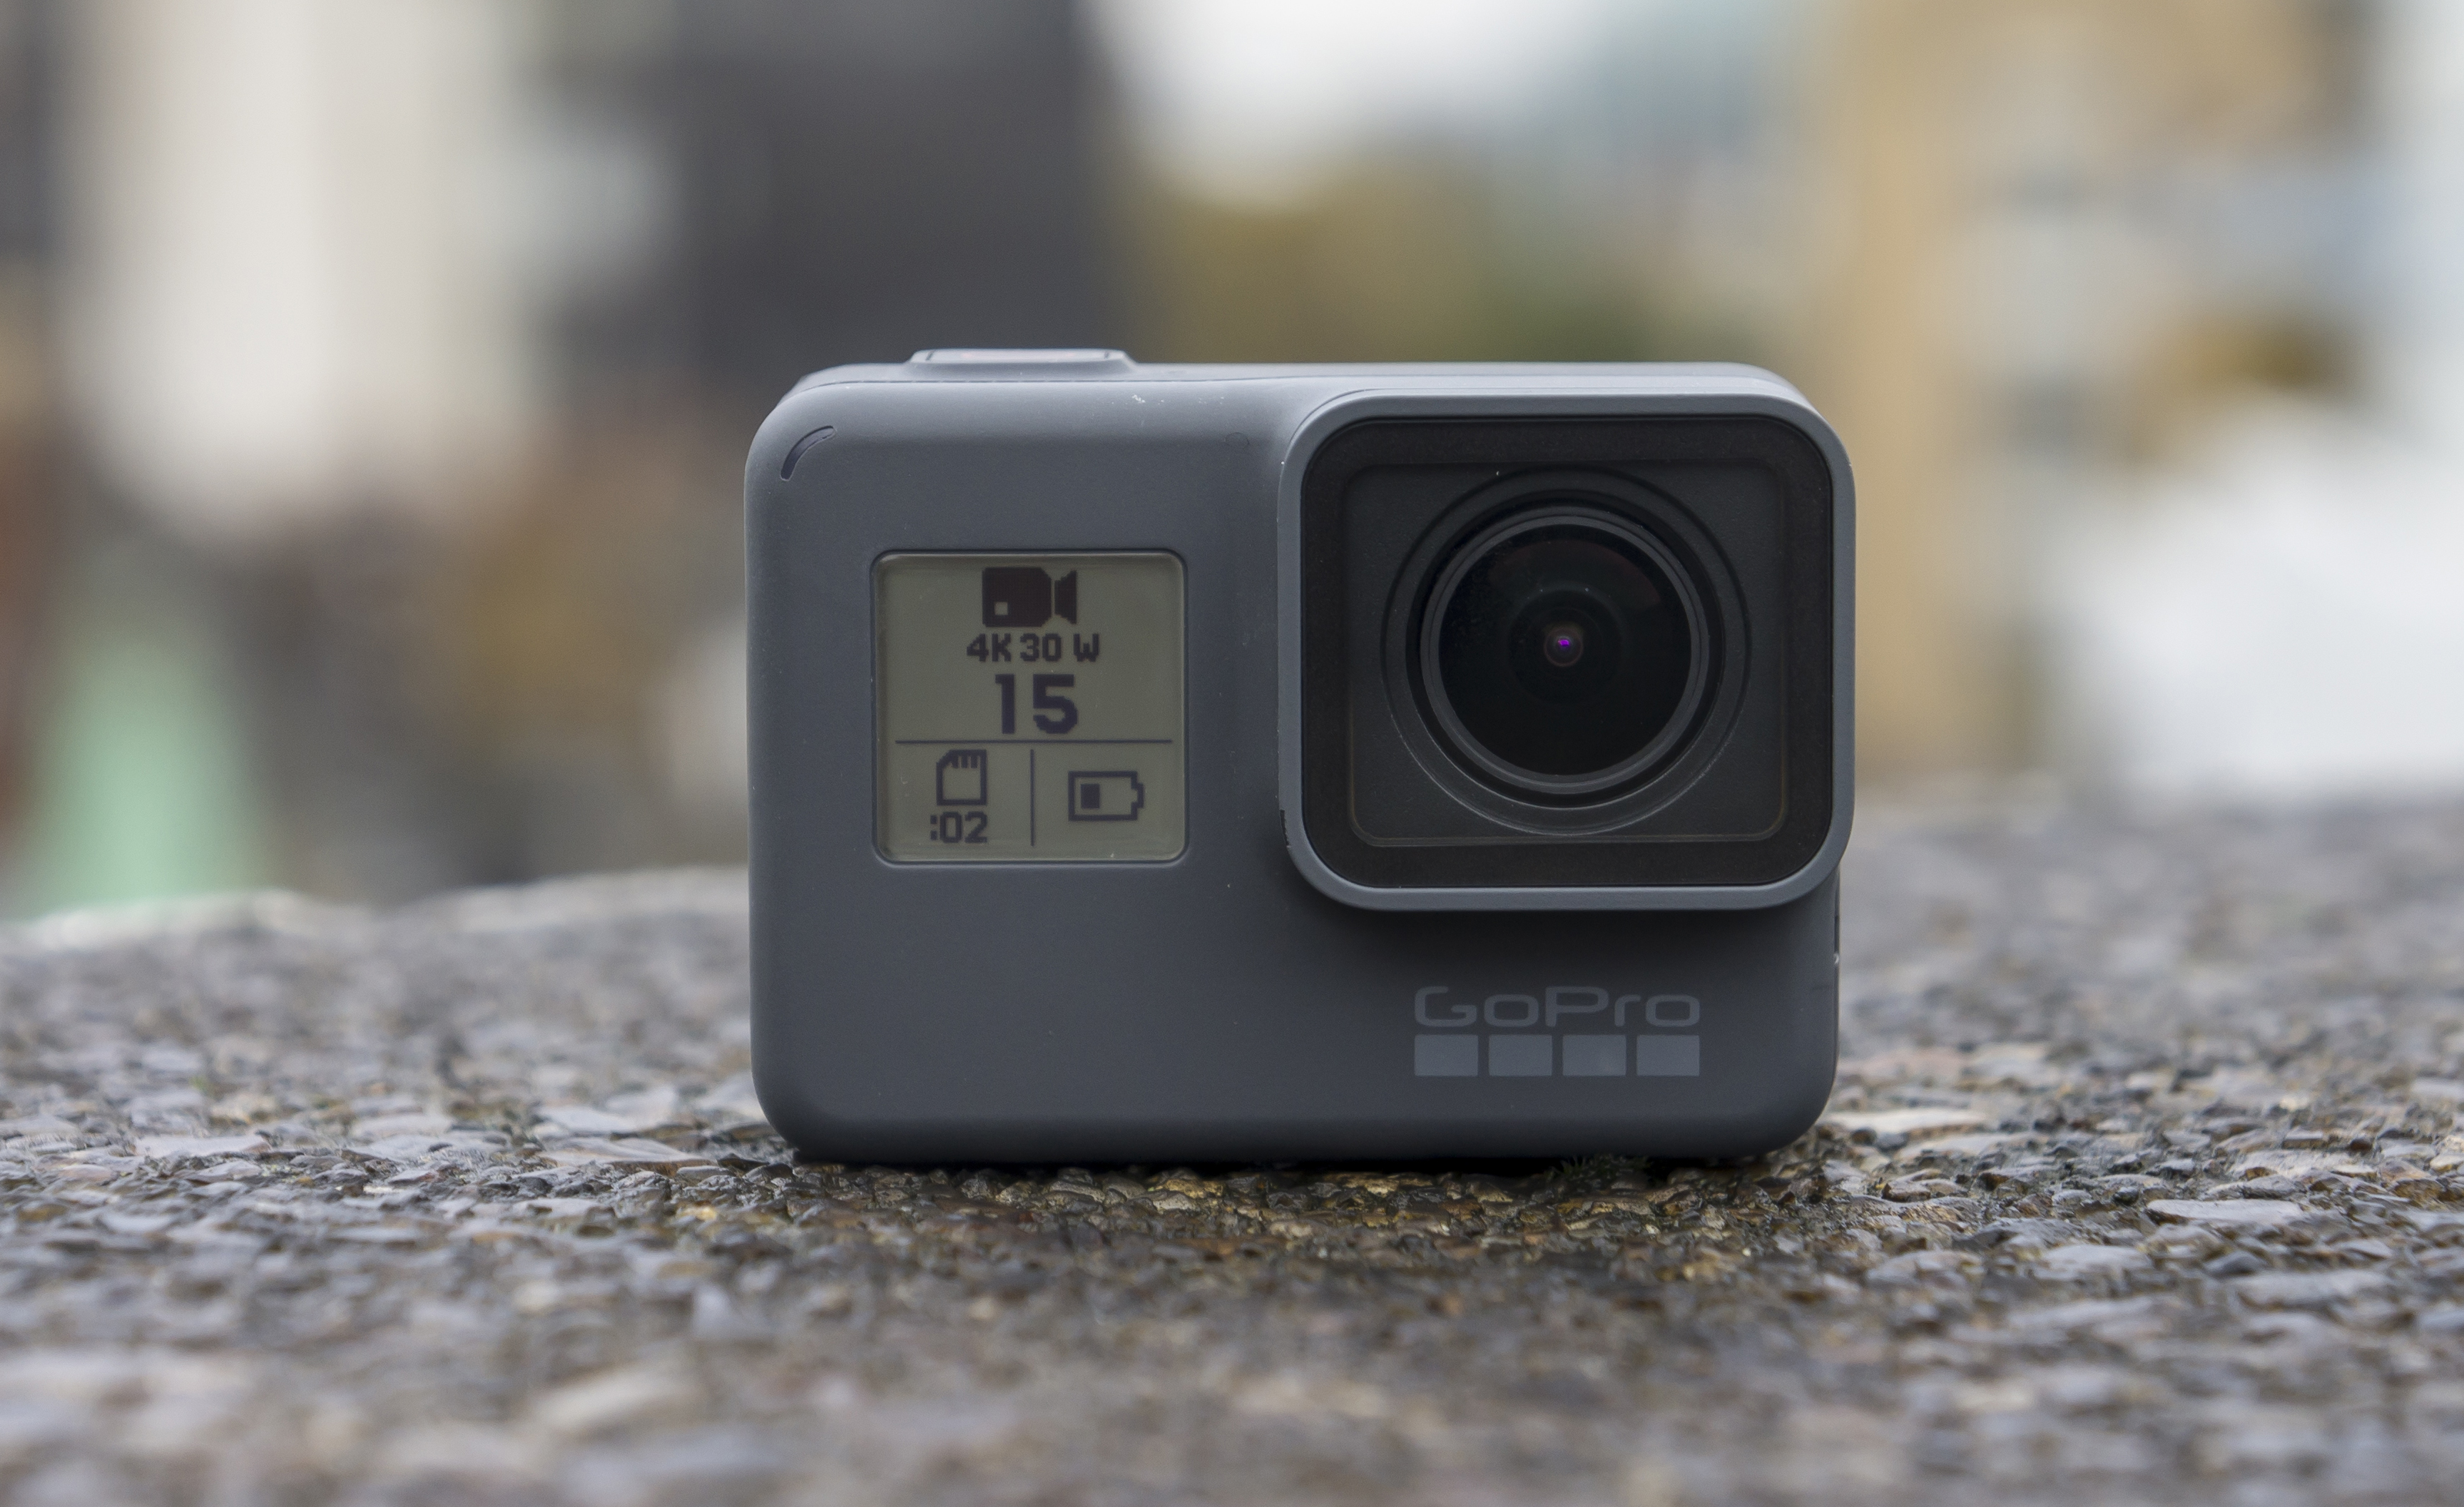 ACTION CAMERA AND ITS ACCESSORIES – NOT JUST SHOOT, RECORD